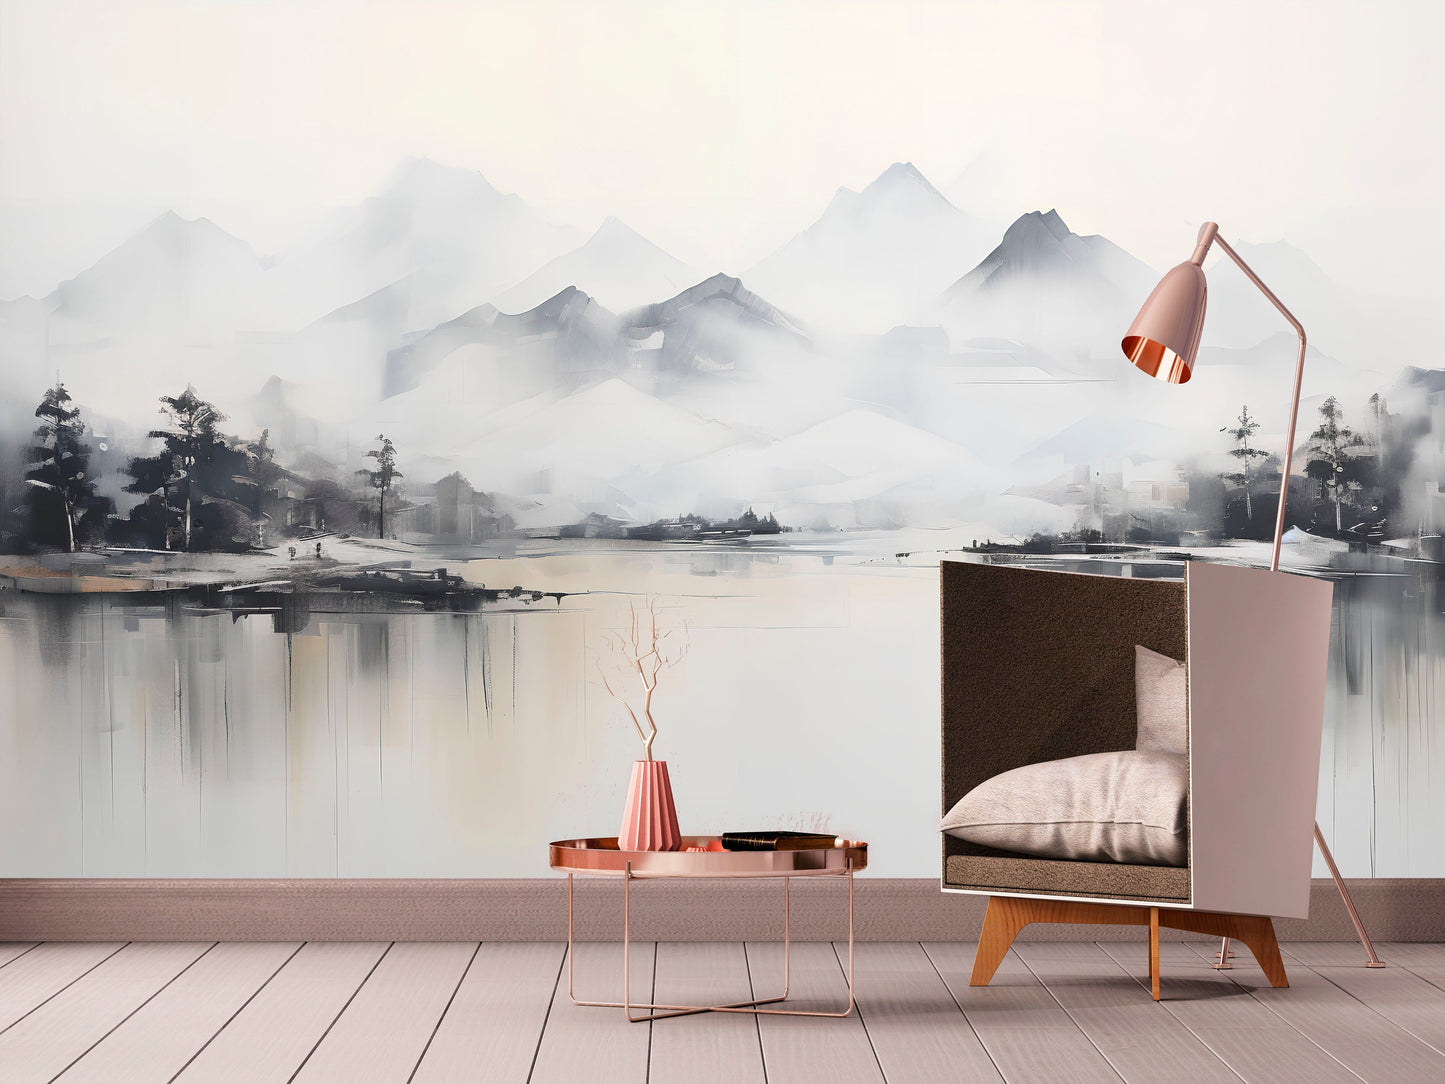 Extra large mountains wallpaper, self adhesive black white wall mural, peel and stick landscape wallpaper, temporary nature wallcovering